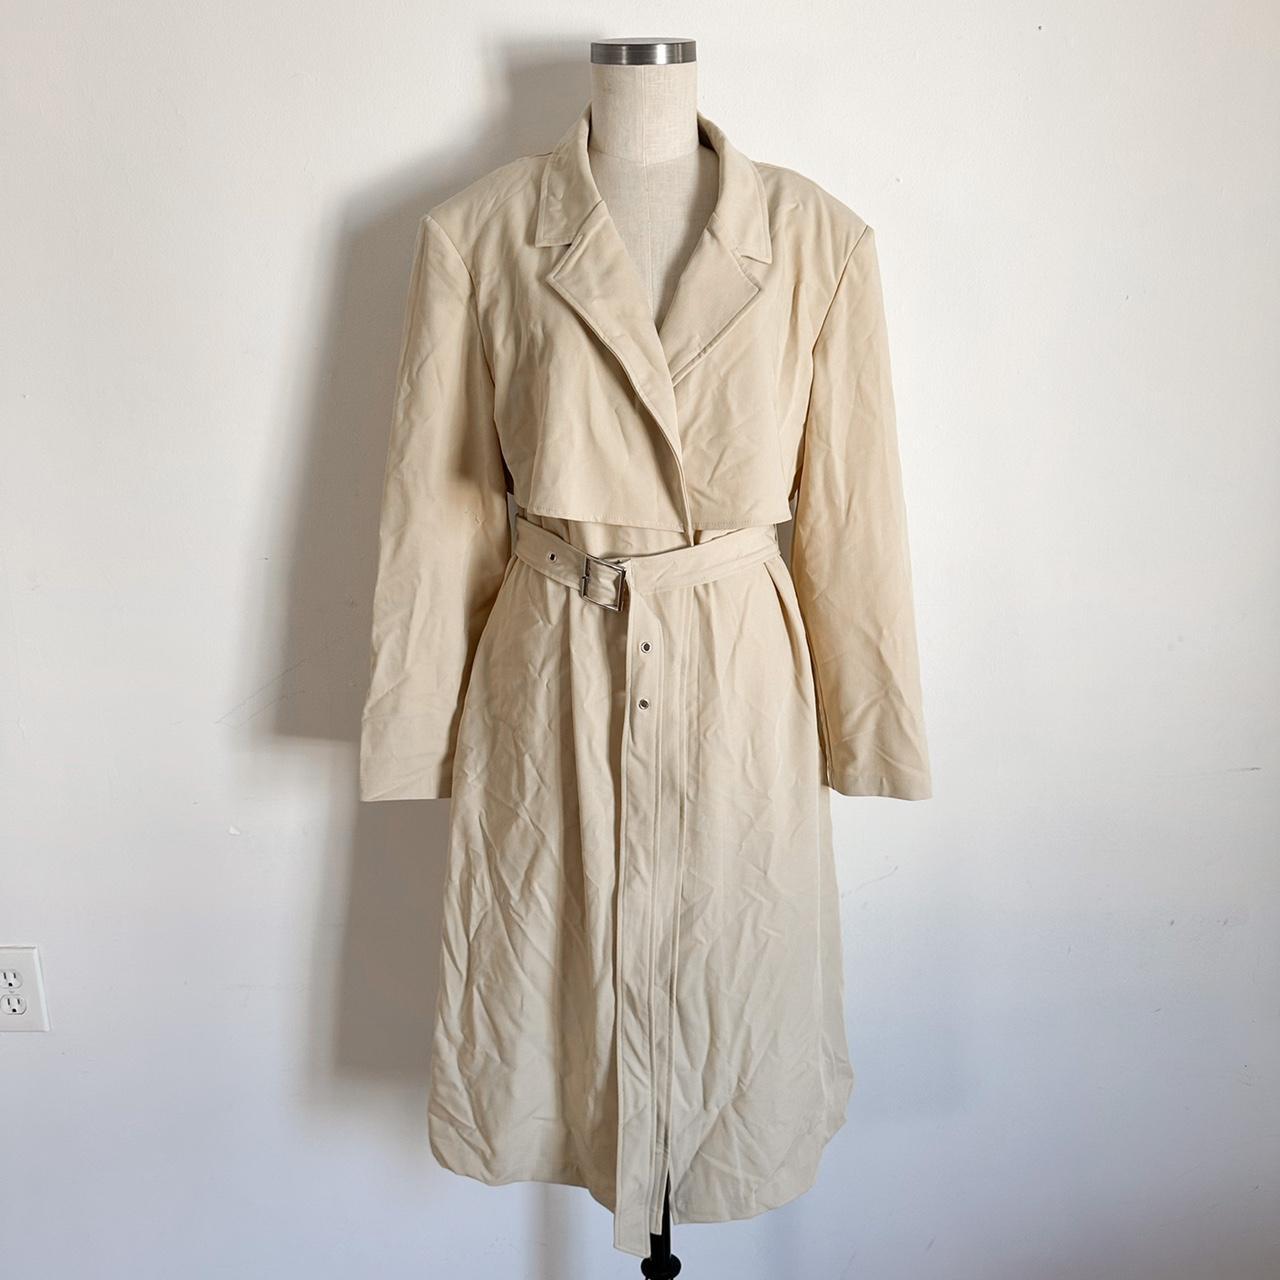 We Wore What long trench coat, NWT retail @ 99 — size L - Depop